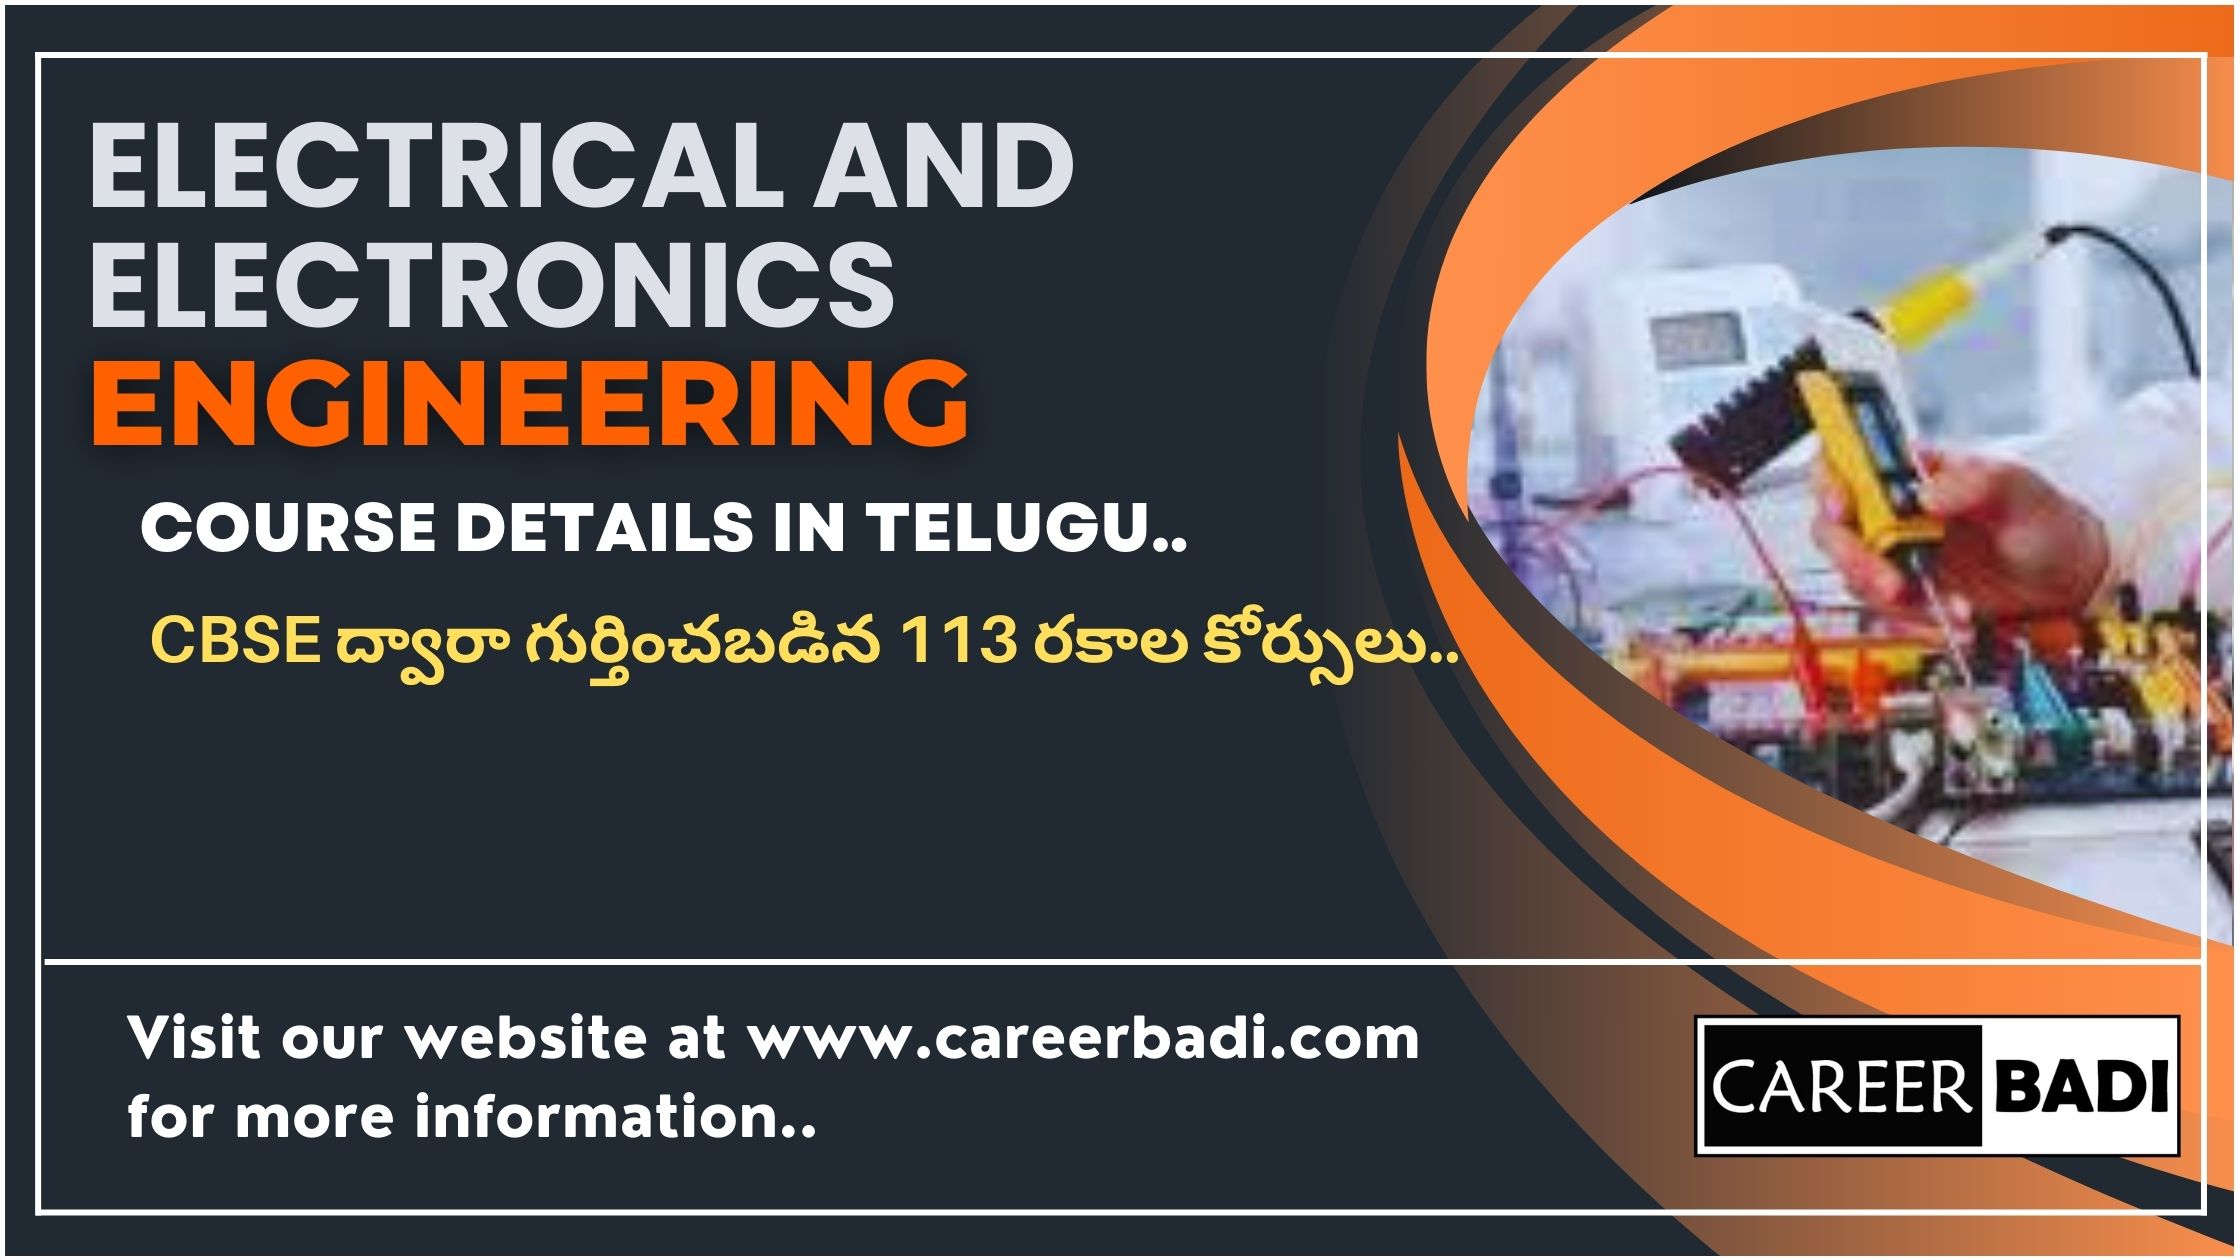 Electrical and Electronics Engineering Course Details in Telugu